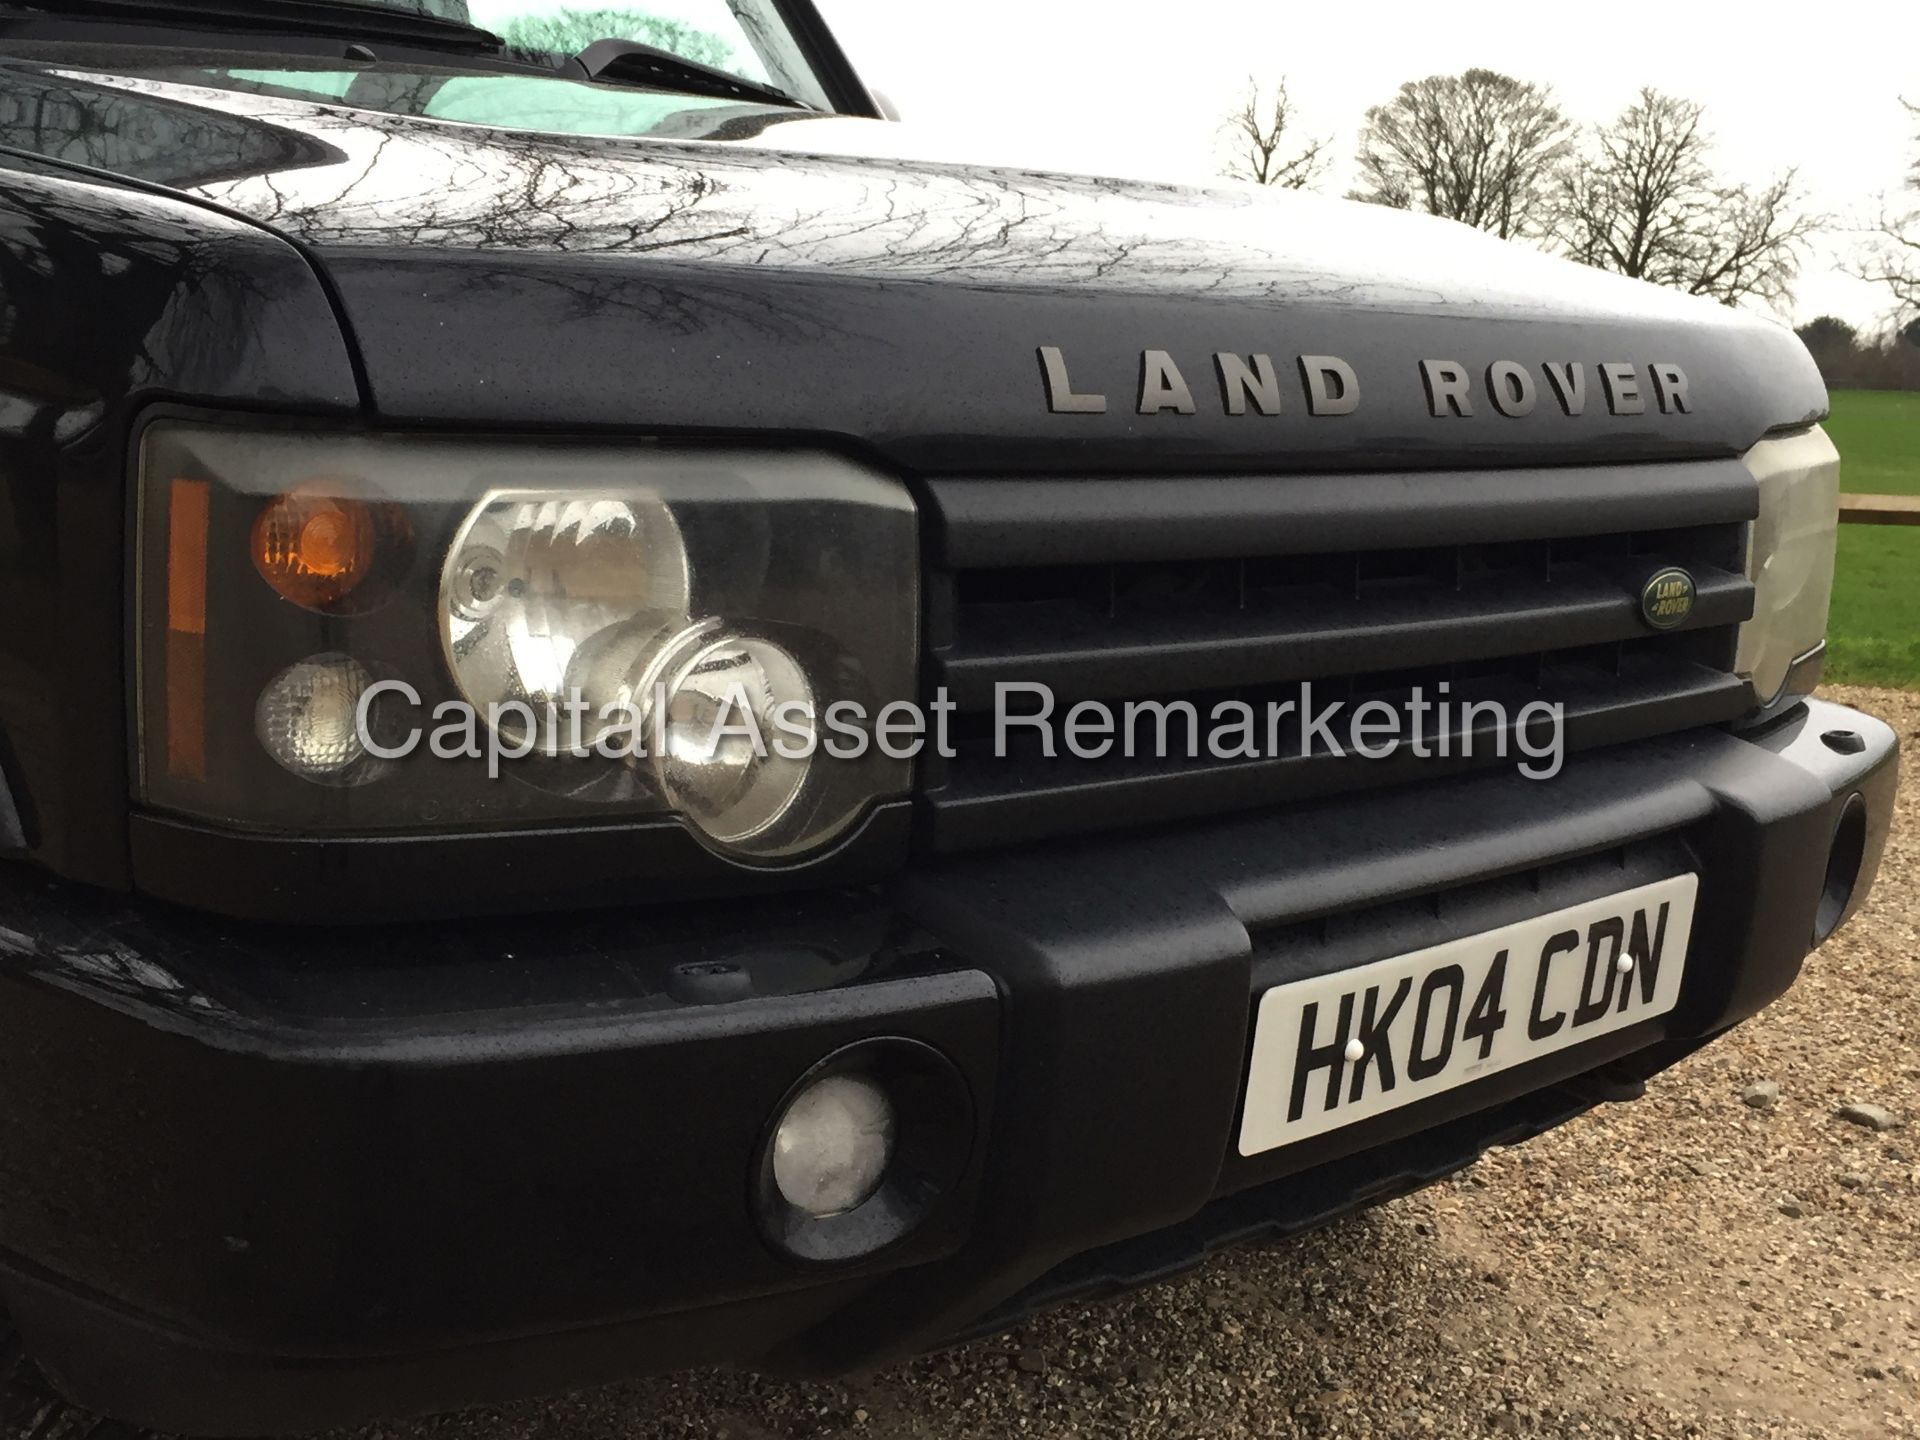 LAND ROVER DISCOVERY TD5 'LANDMARK' (2004 - 04 REG) 7 SEATER - LEATHER - AUTO (NO VAT - SAVE 20%) - Image 10 of 20